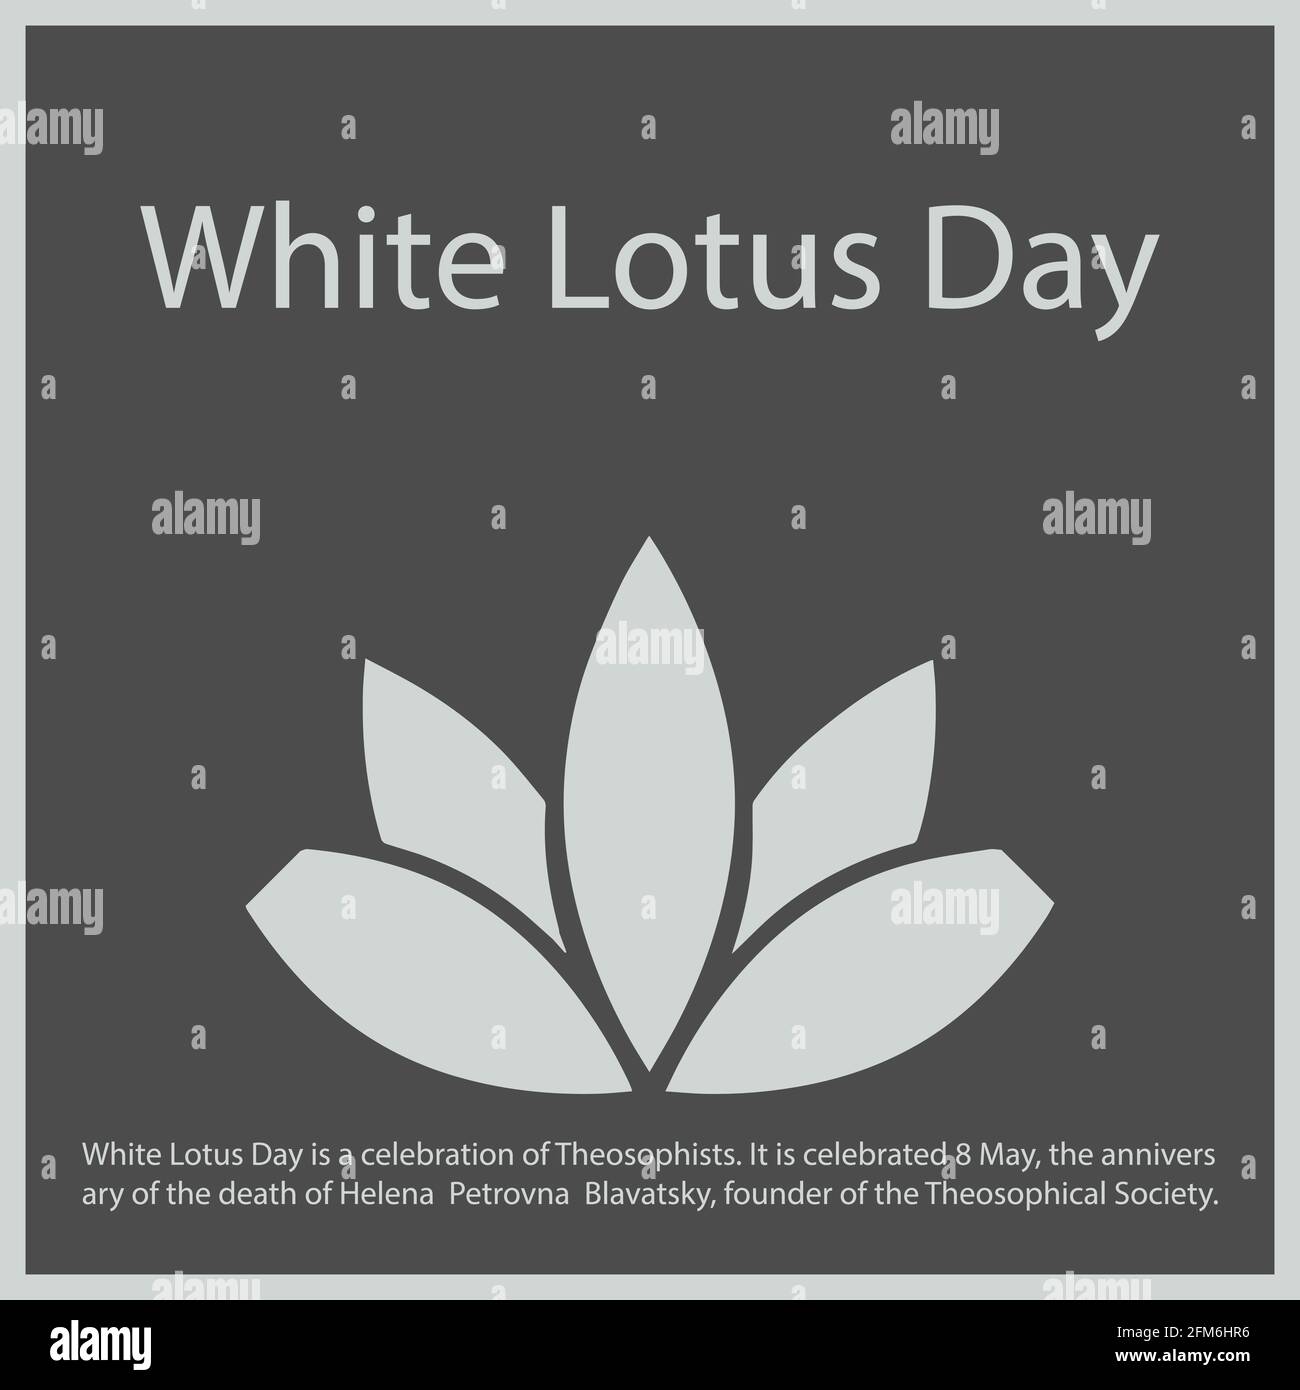 White Lotus Day is a celebration of Theosophists. It is celebrated 8 May, the anniversary of the death of Helena Petrovna Blavatsky, founder of the Th Stock Vector